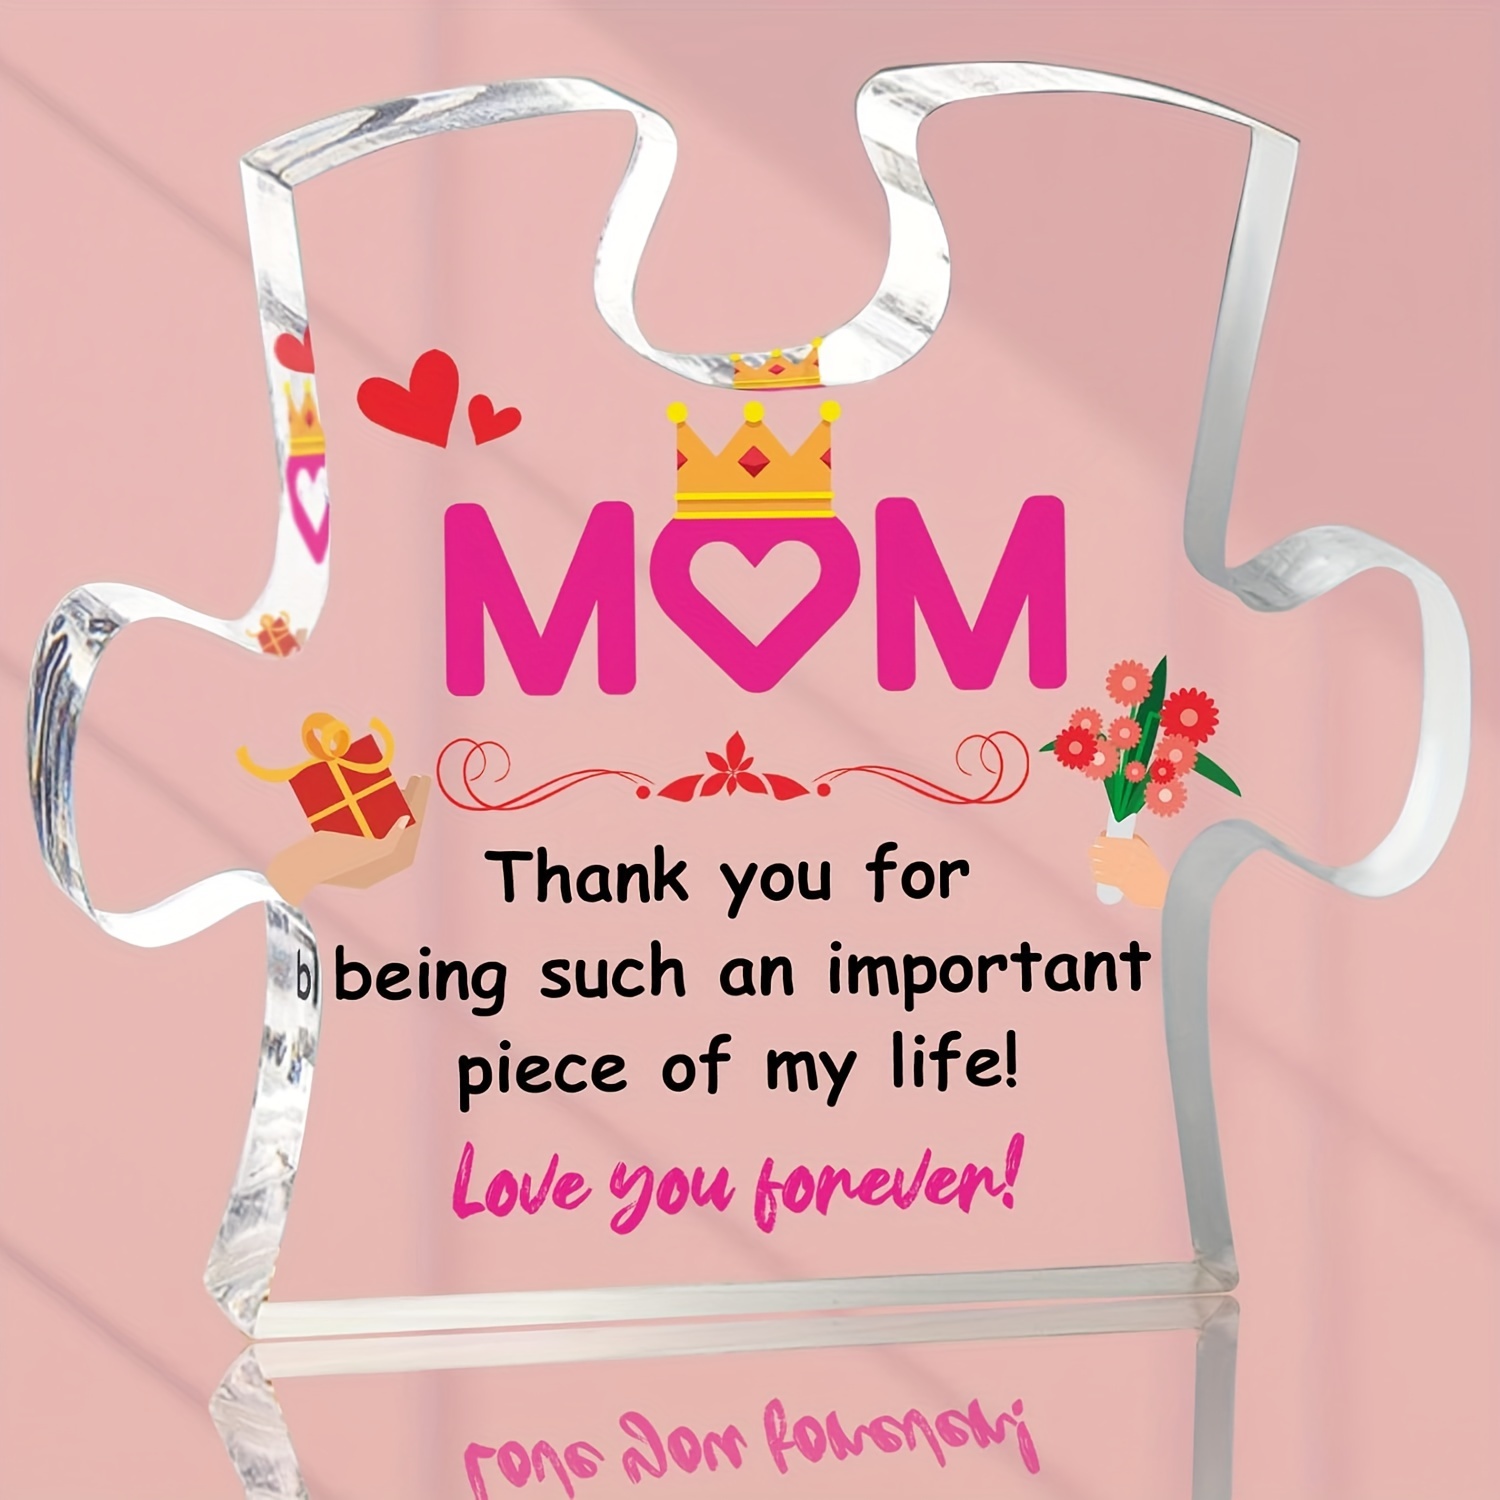 Birthday Gifts for Mom - Engraved Acrylic Block Puzzle Mom Present 4.1 x  3.5 inch - Cool Mom Present…See more Birthday Gifts for Mom - Engraved